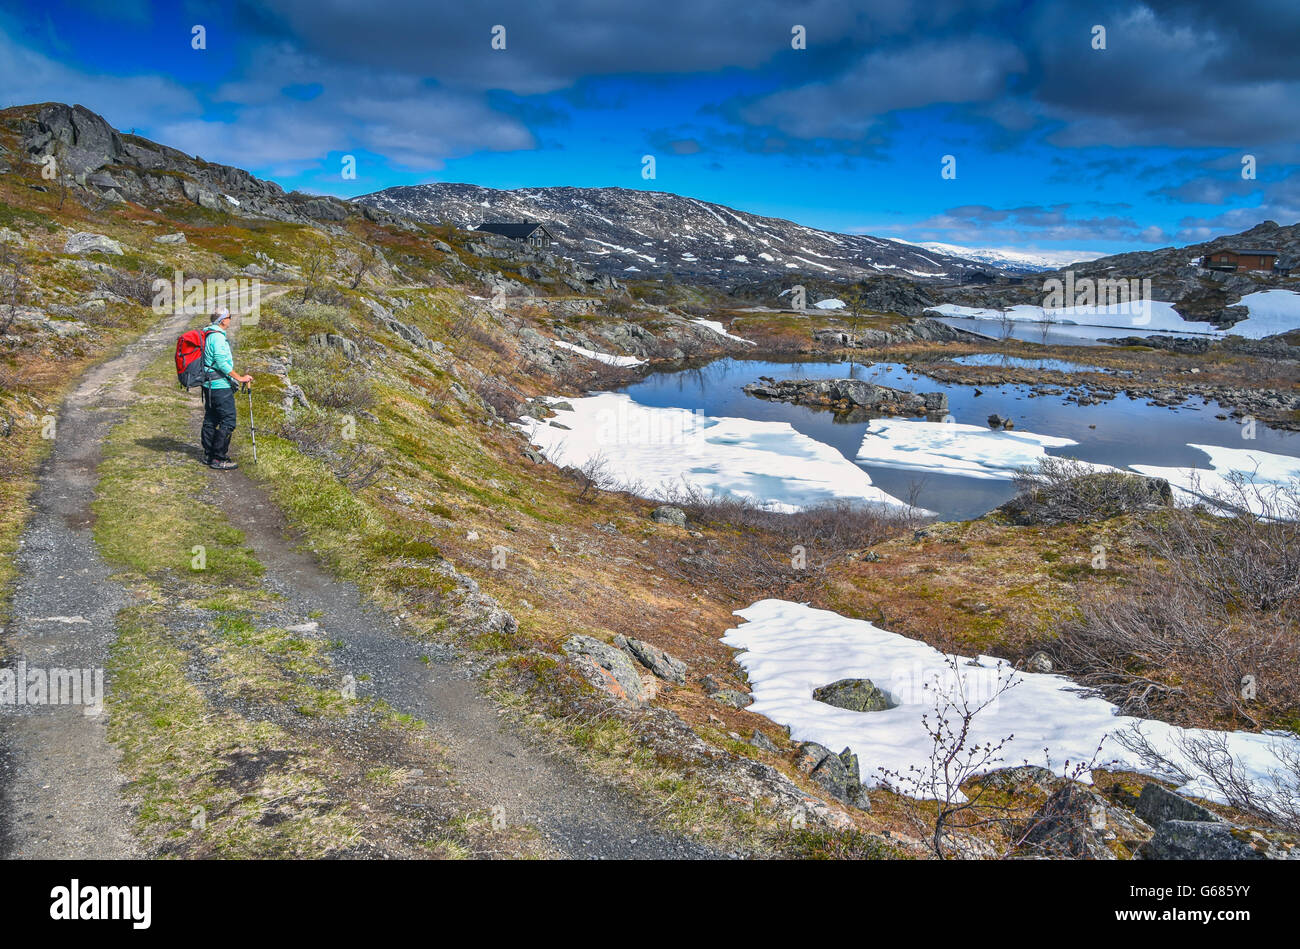 Female hiker with red rucksack walking in wilderness with snowy mountains and frozen lakes Stock Photo